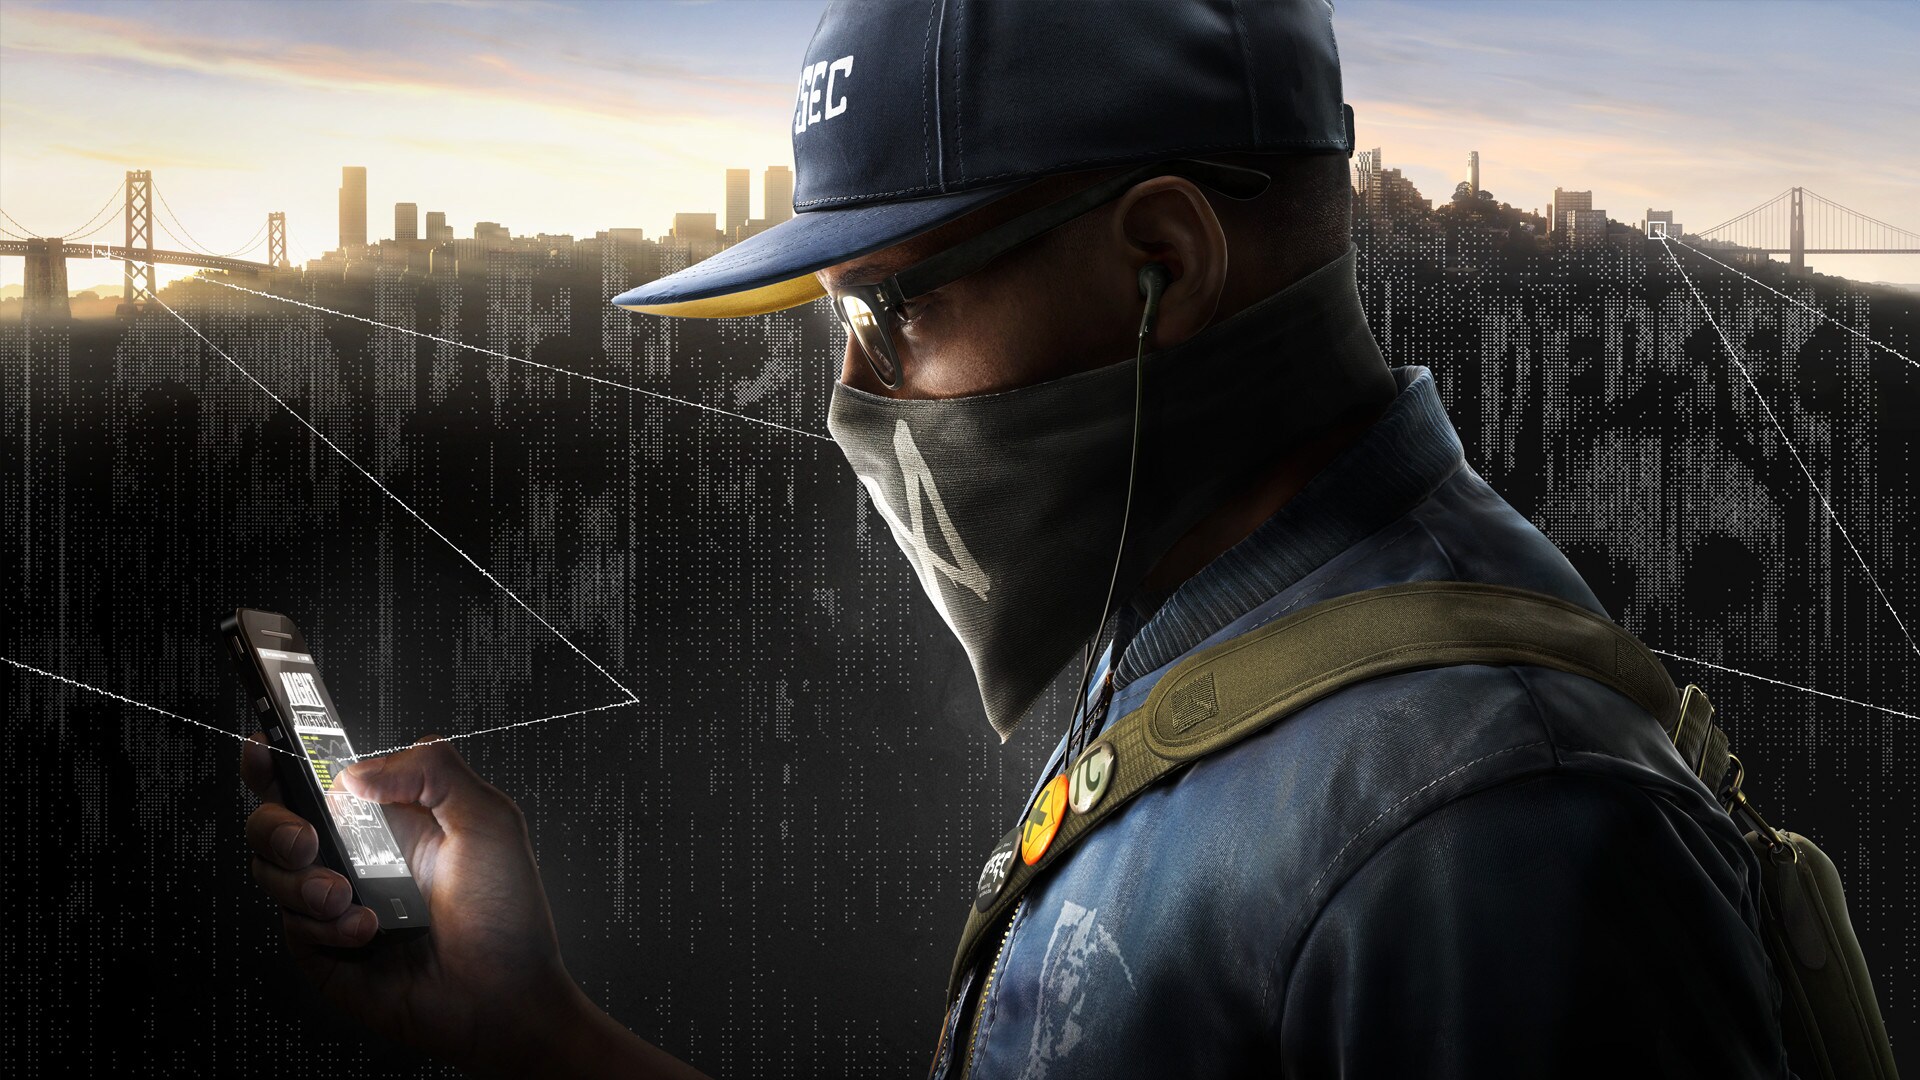 Watch Dogs 2 Deluxe Edition Ubisoft Connect Key Europe